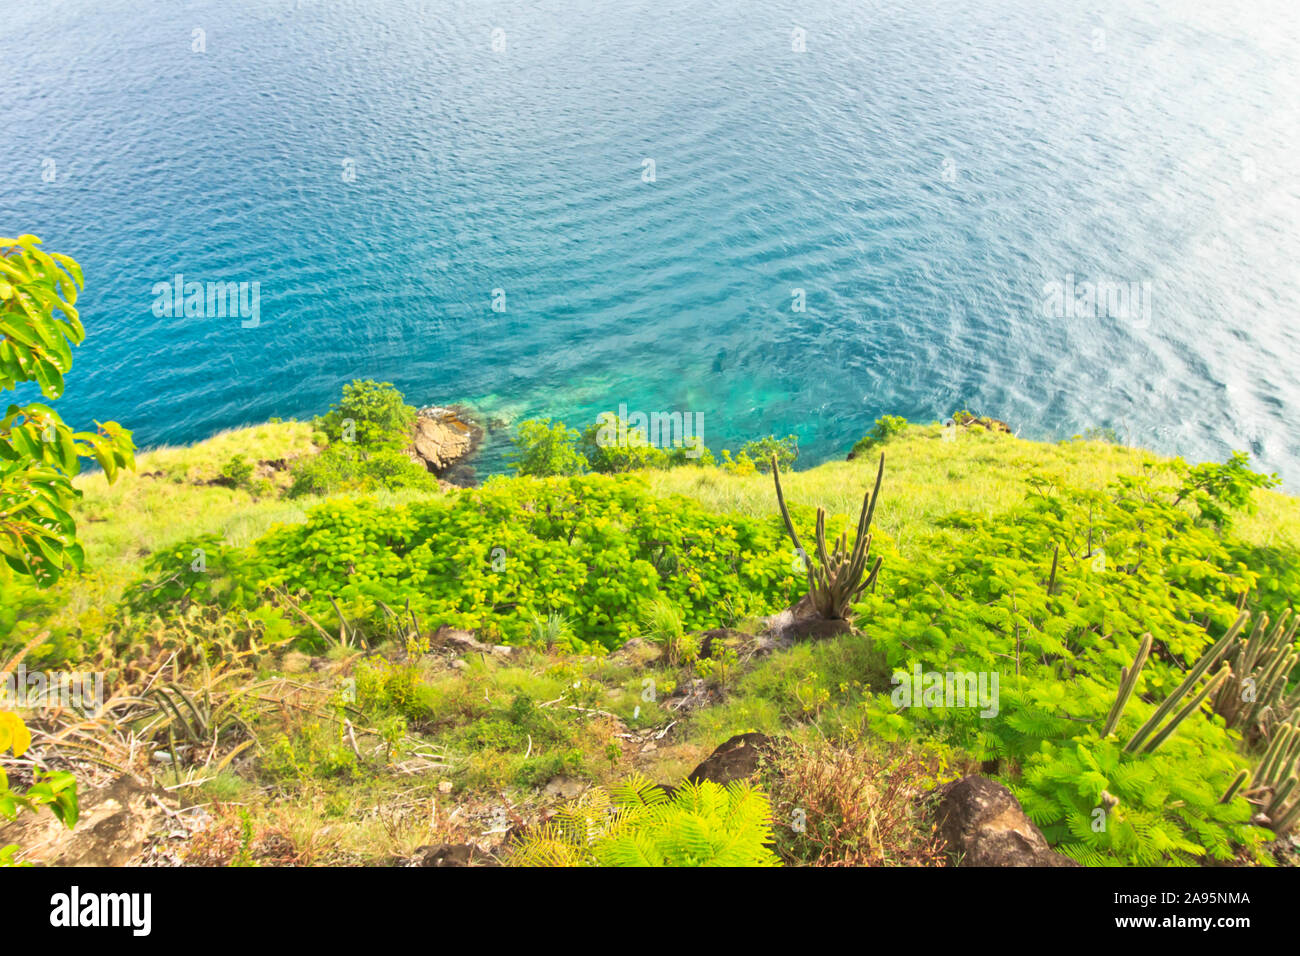 scenic green landscape gently sloping into the tranquil sea below Stock Photo